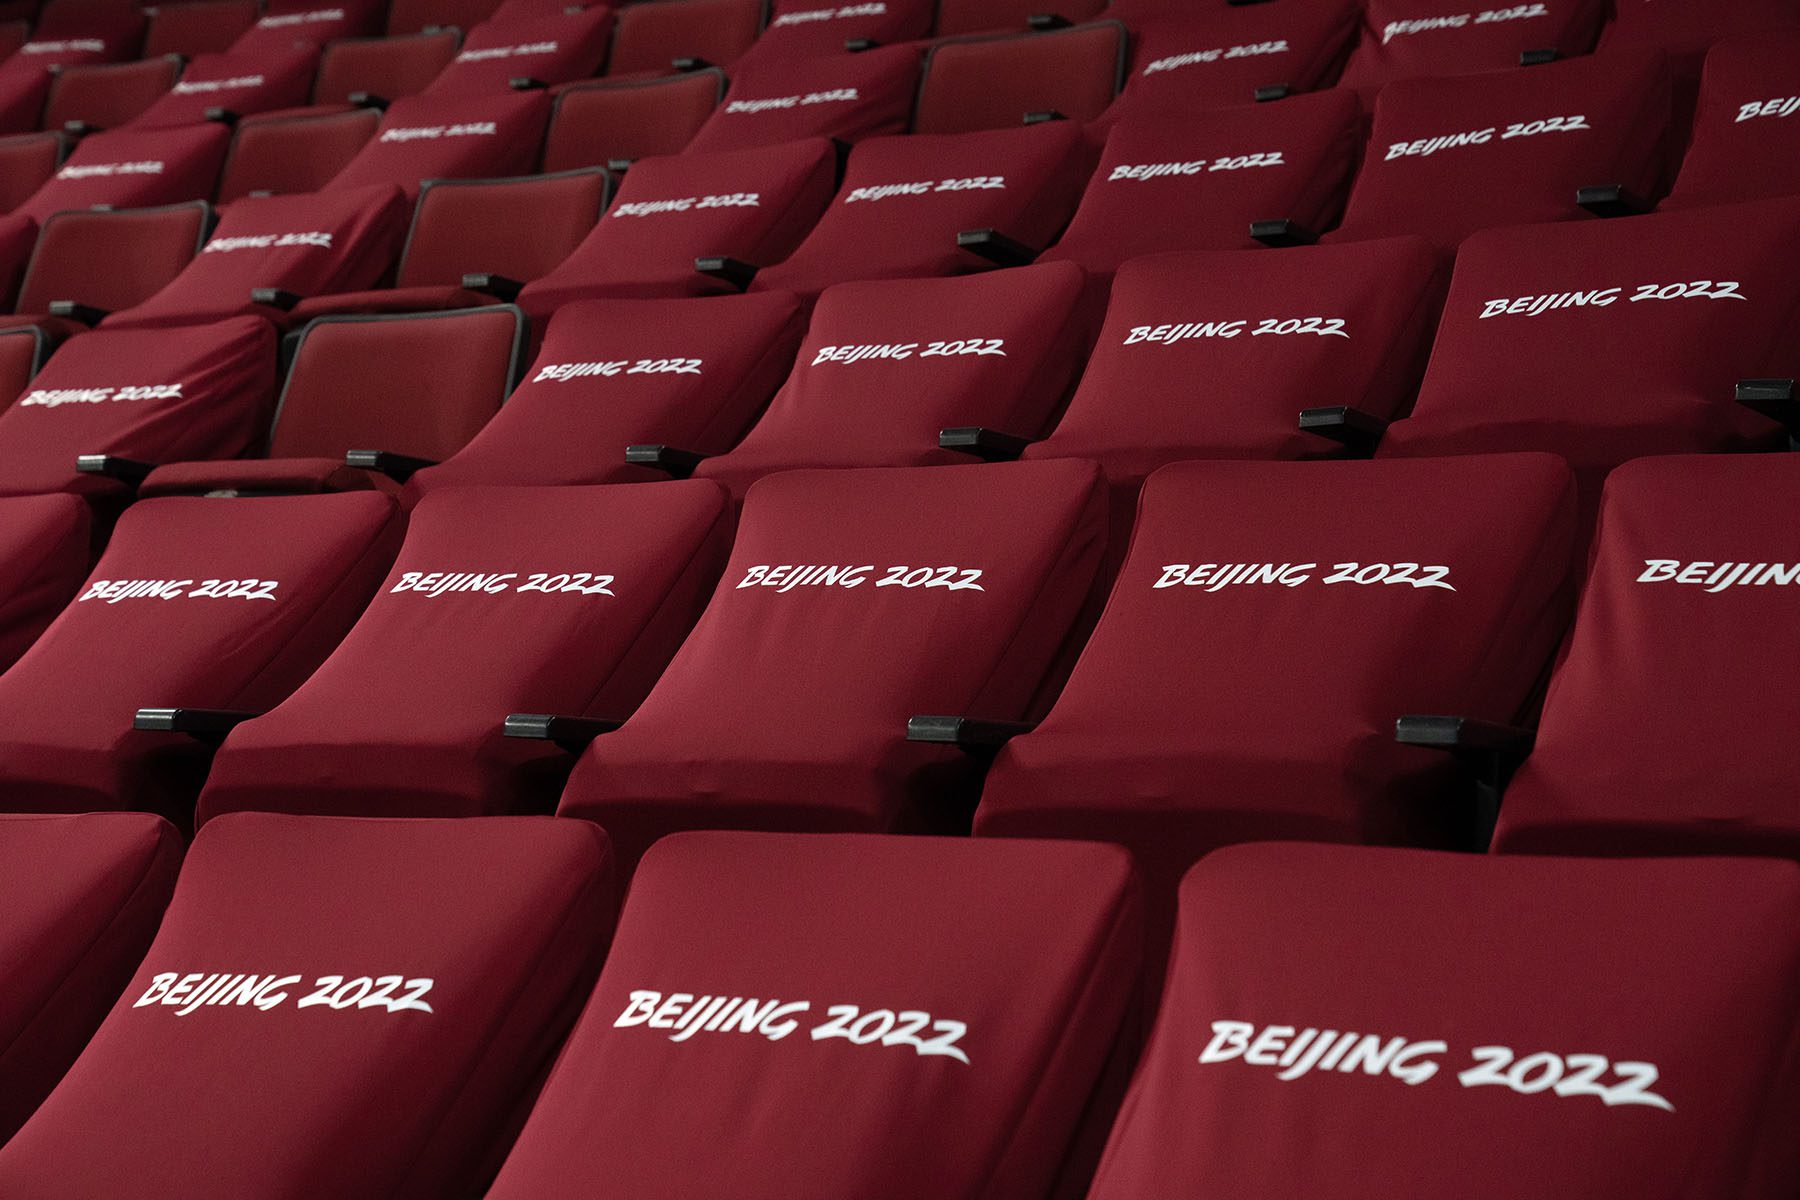 Seats with Beijing 2022 covers are pictured at Wukesong Arena.